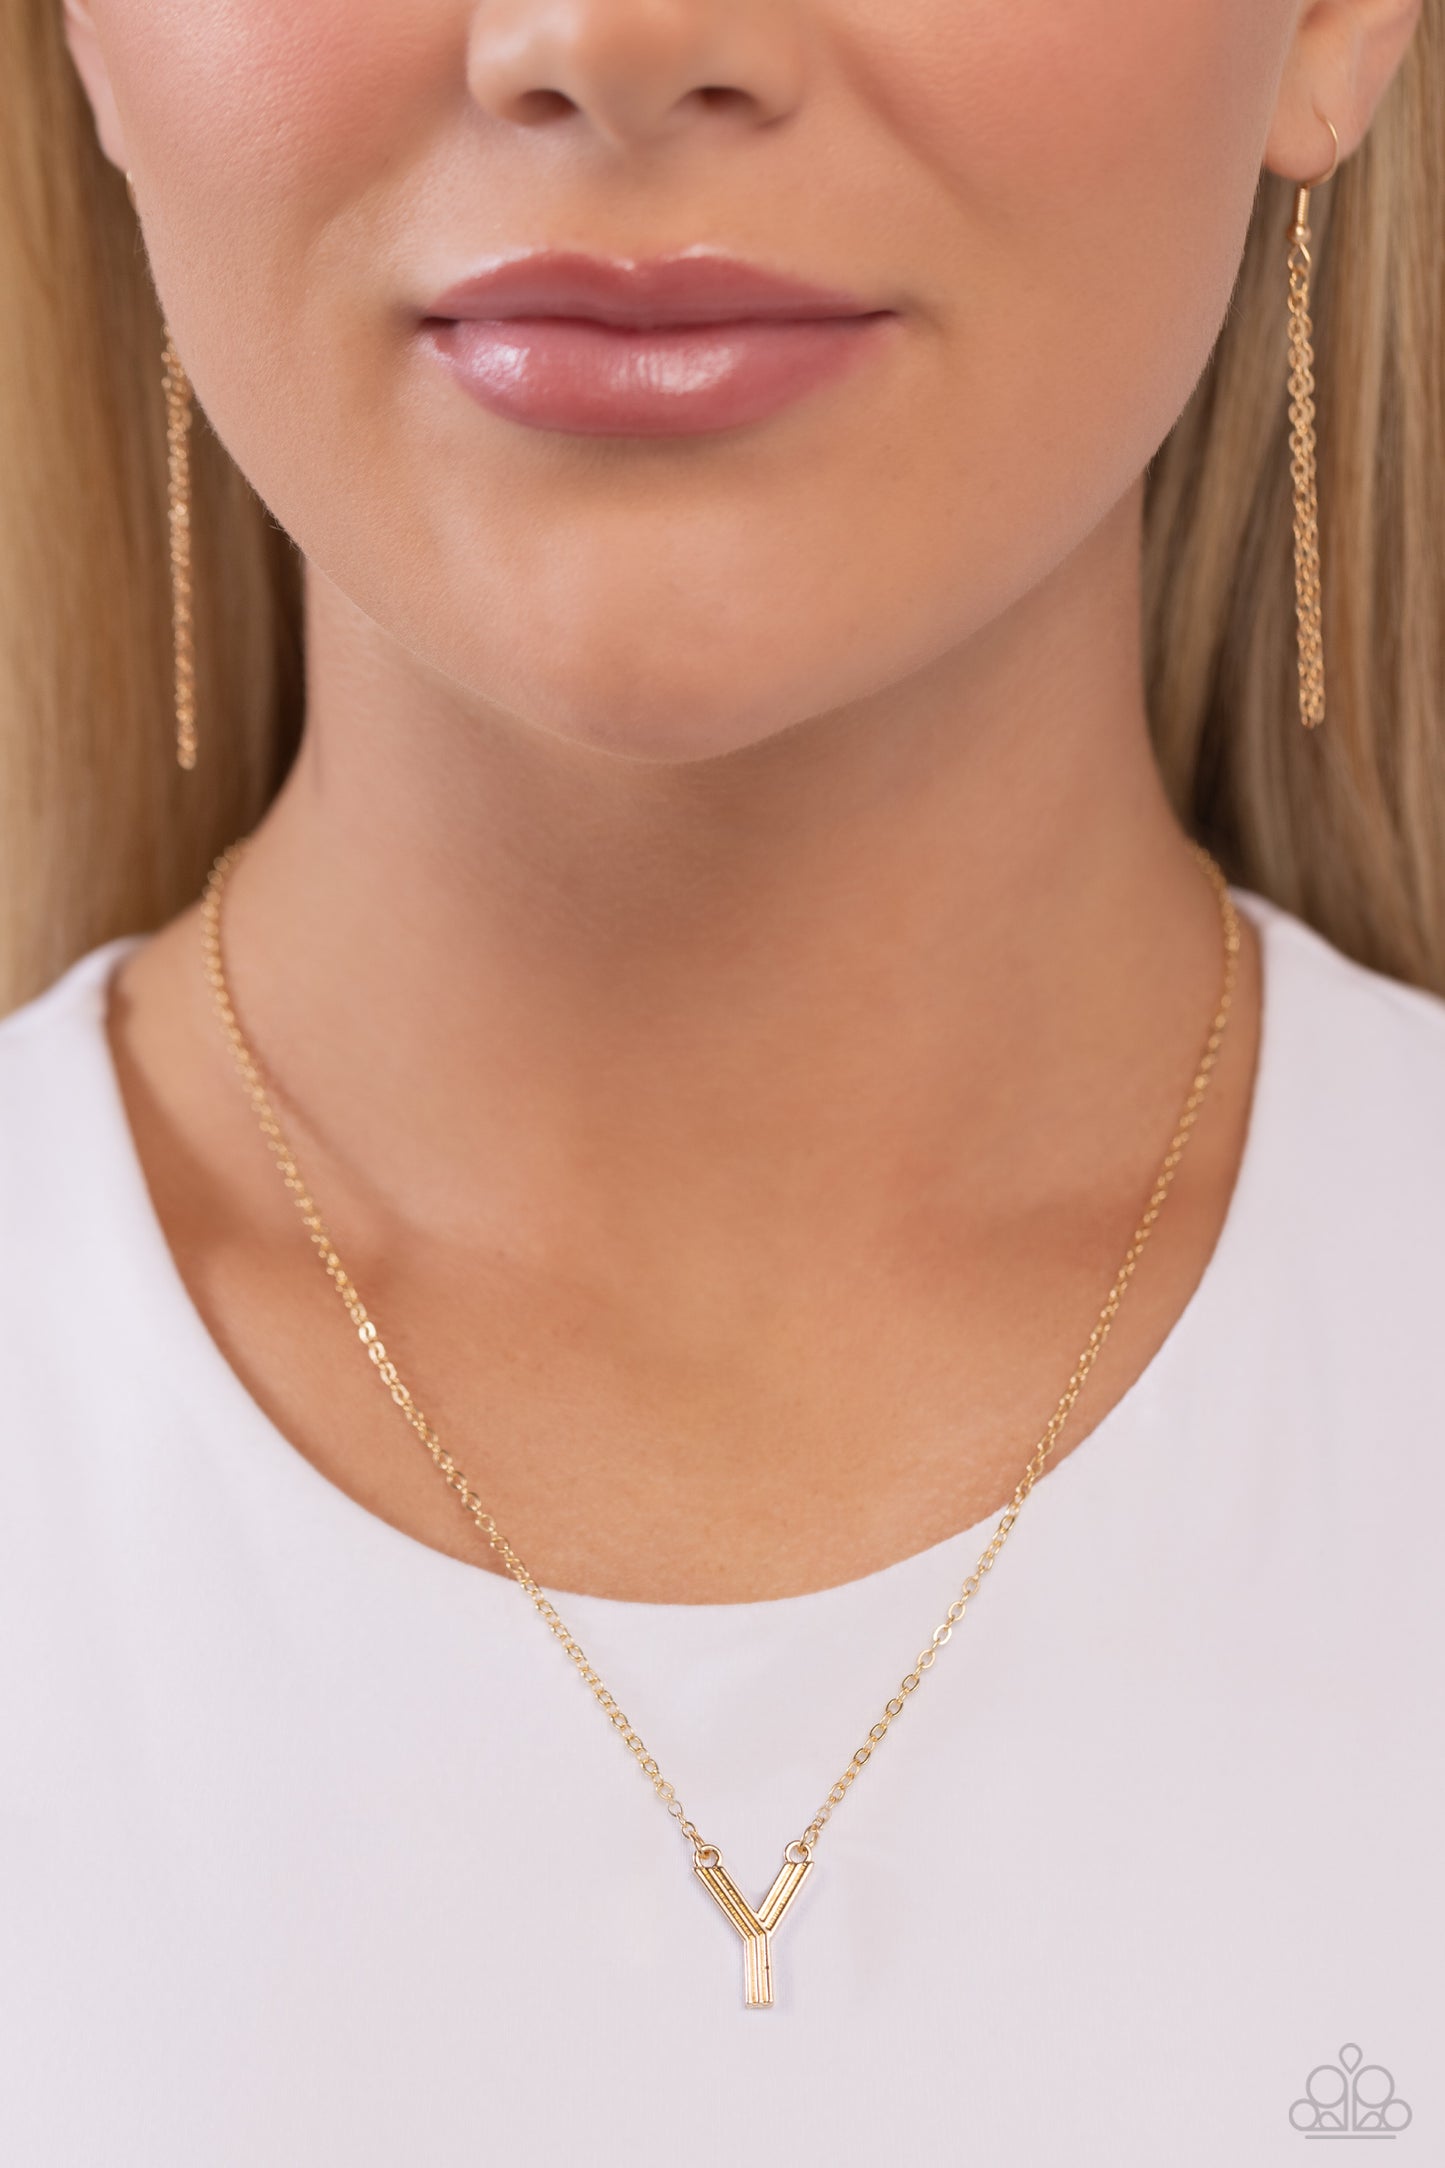 Leave Your Initials Gold *Y* Necklace Paparazzi